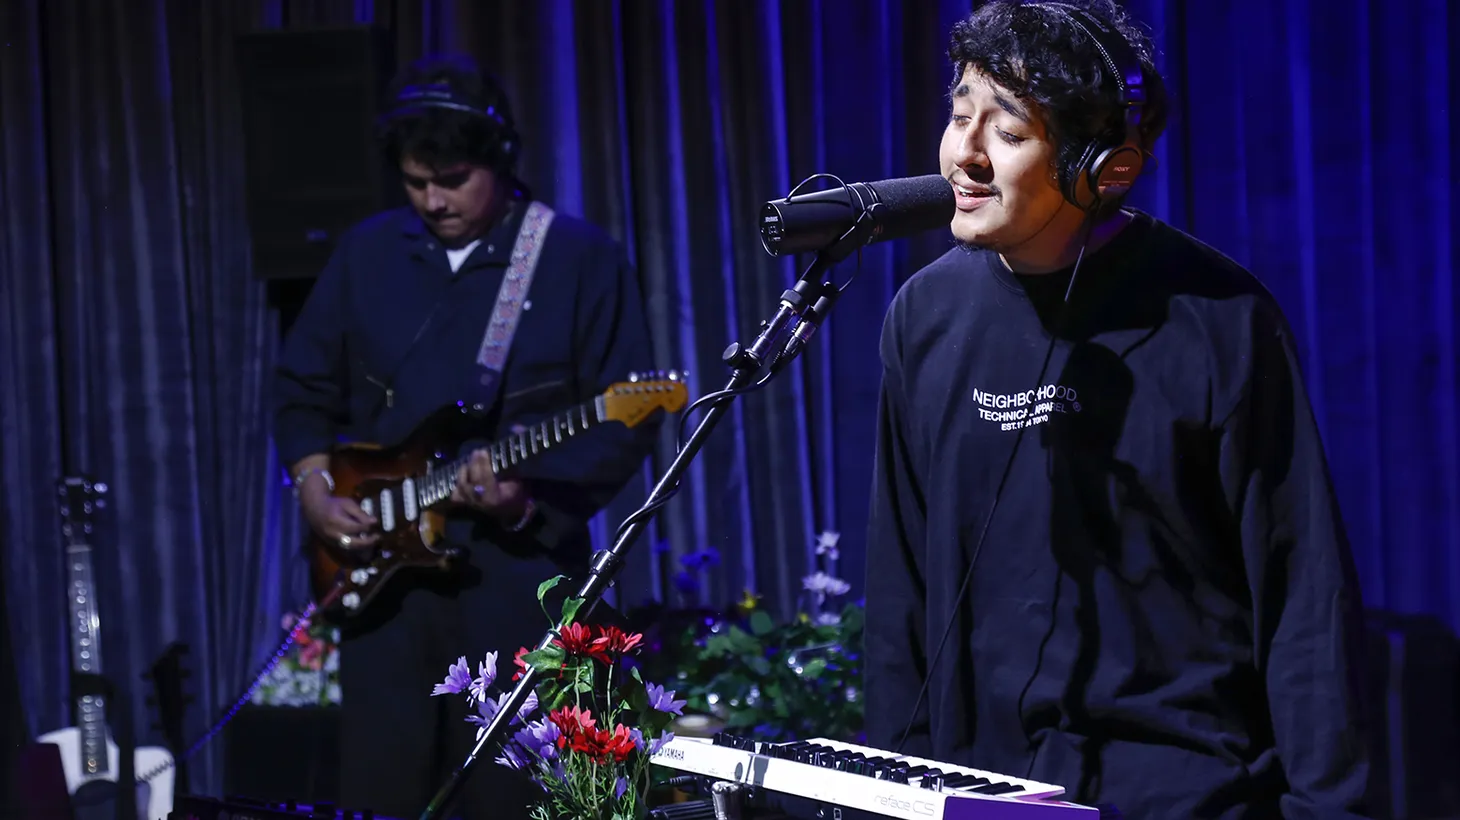 Get swoony: Cuco returns to KCRW HQ, and brings our performance studio fully back to life.